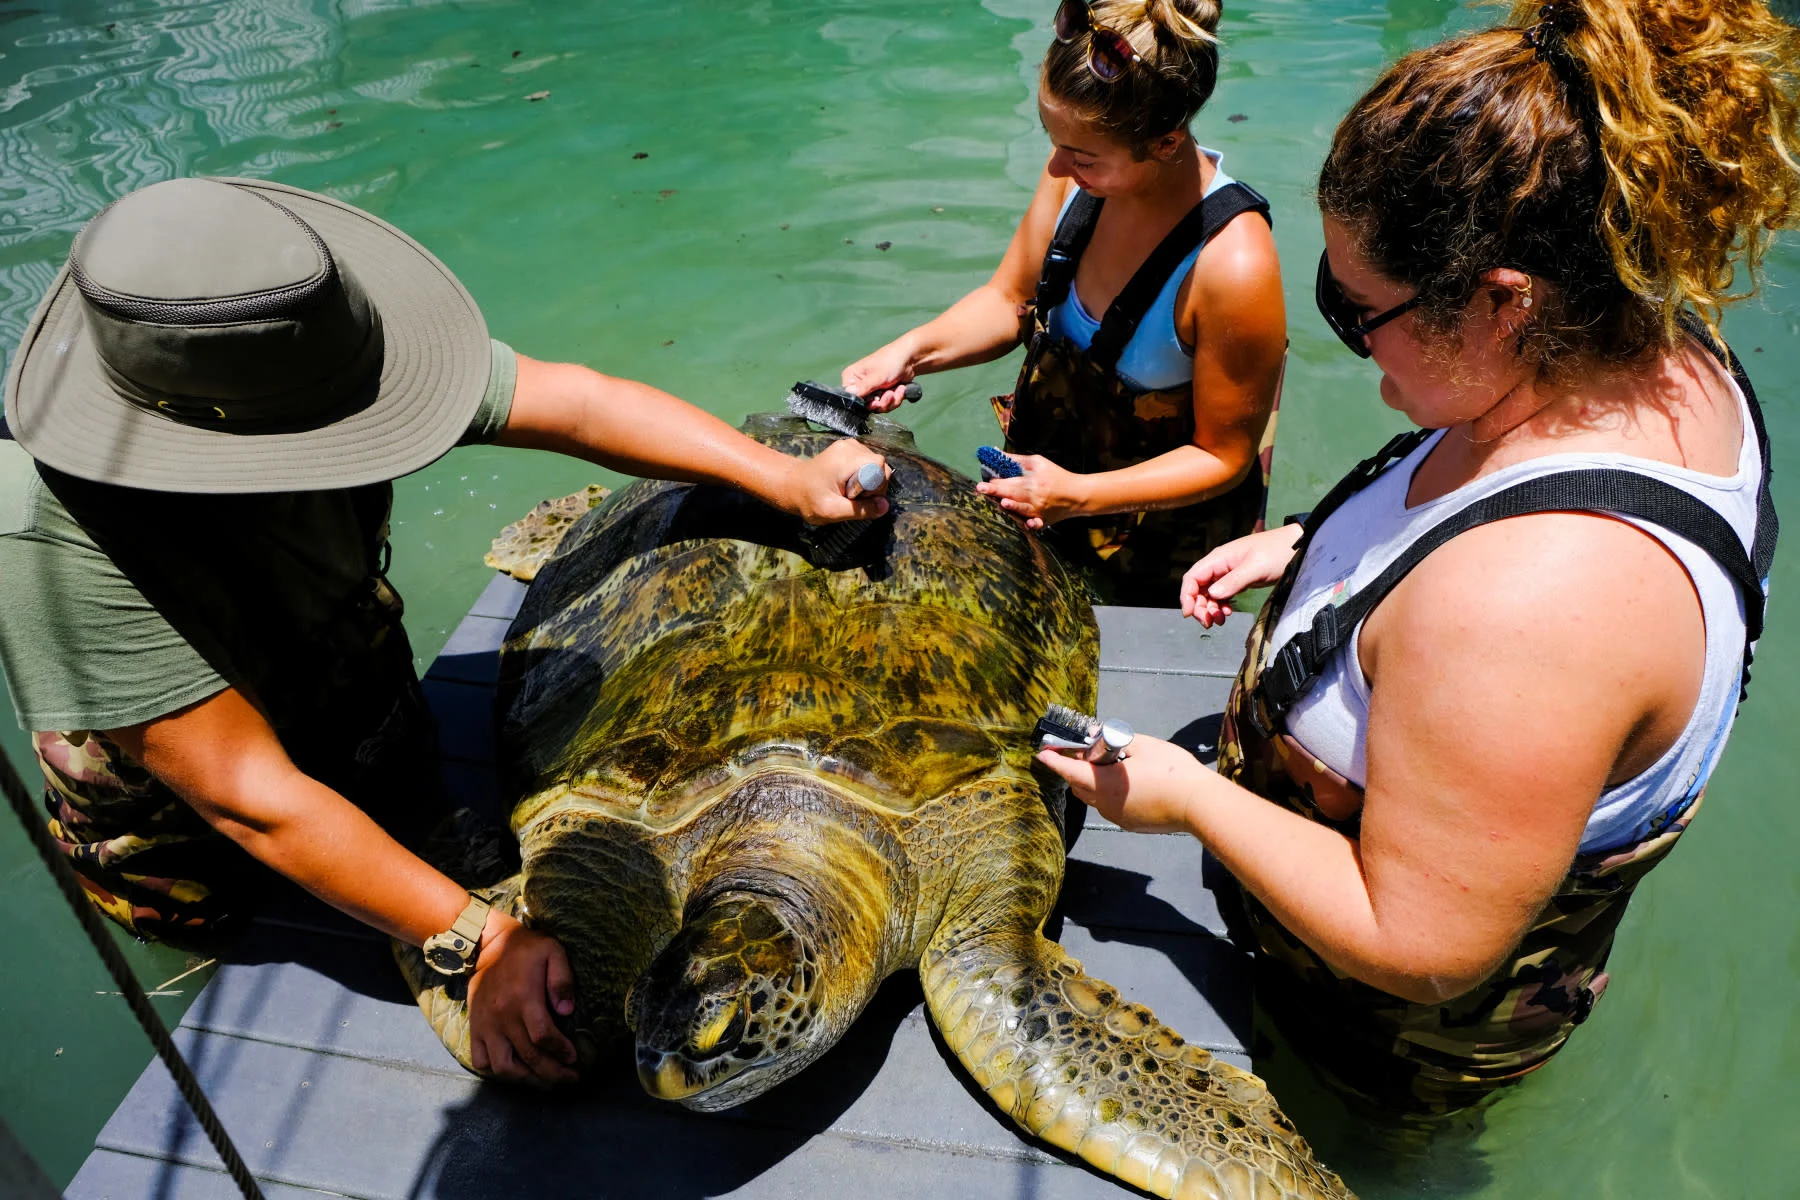 A Green Turtle is cleaned at the Turtle Hospital, the first licensed veterinarian sea turtle hospital in the world, in Marathon, Florida, U.S. July 29, 2022. REUTERS/Maria Alejandra Cardona